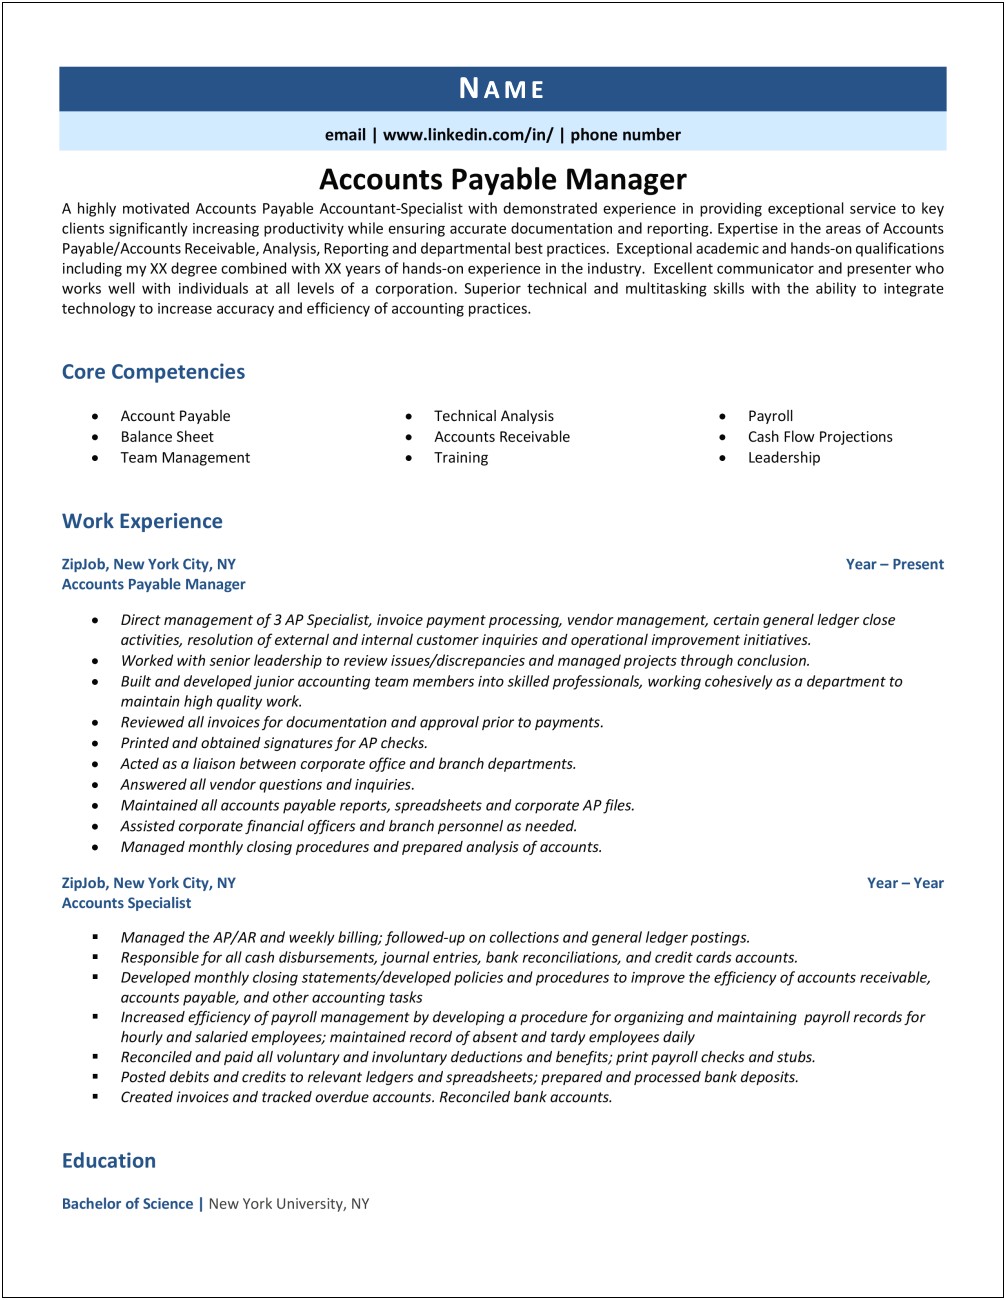 Resume Objective For Accounts Payable Manager